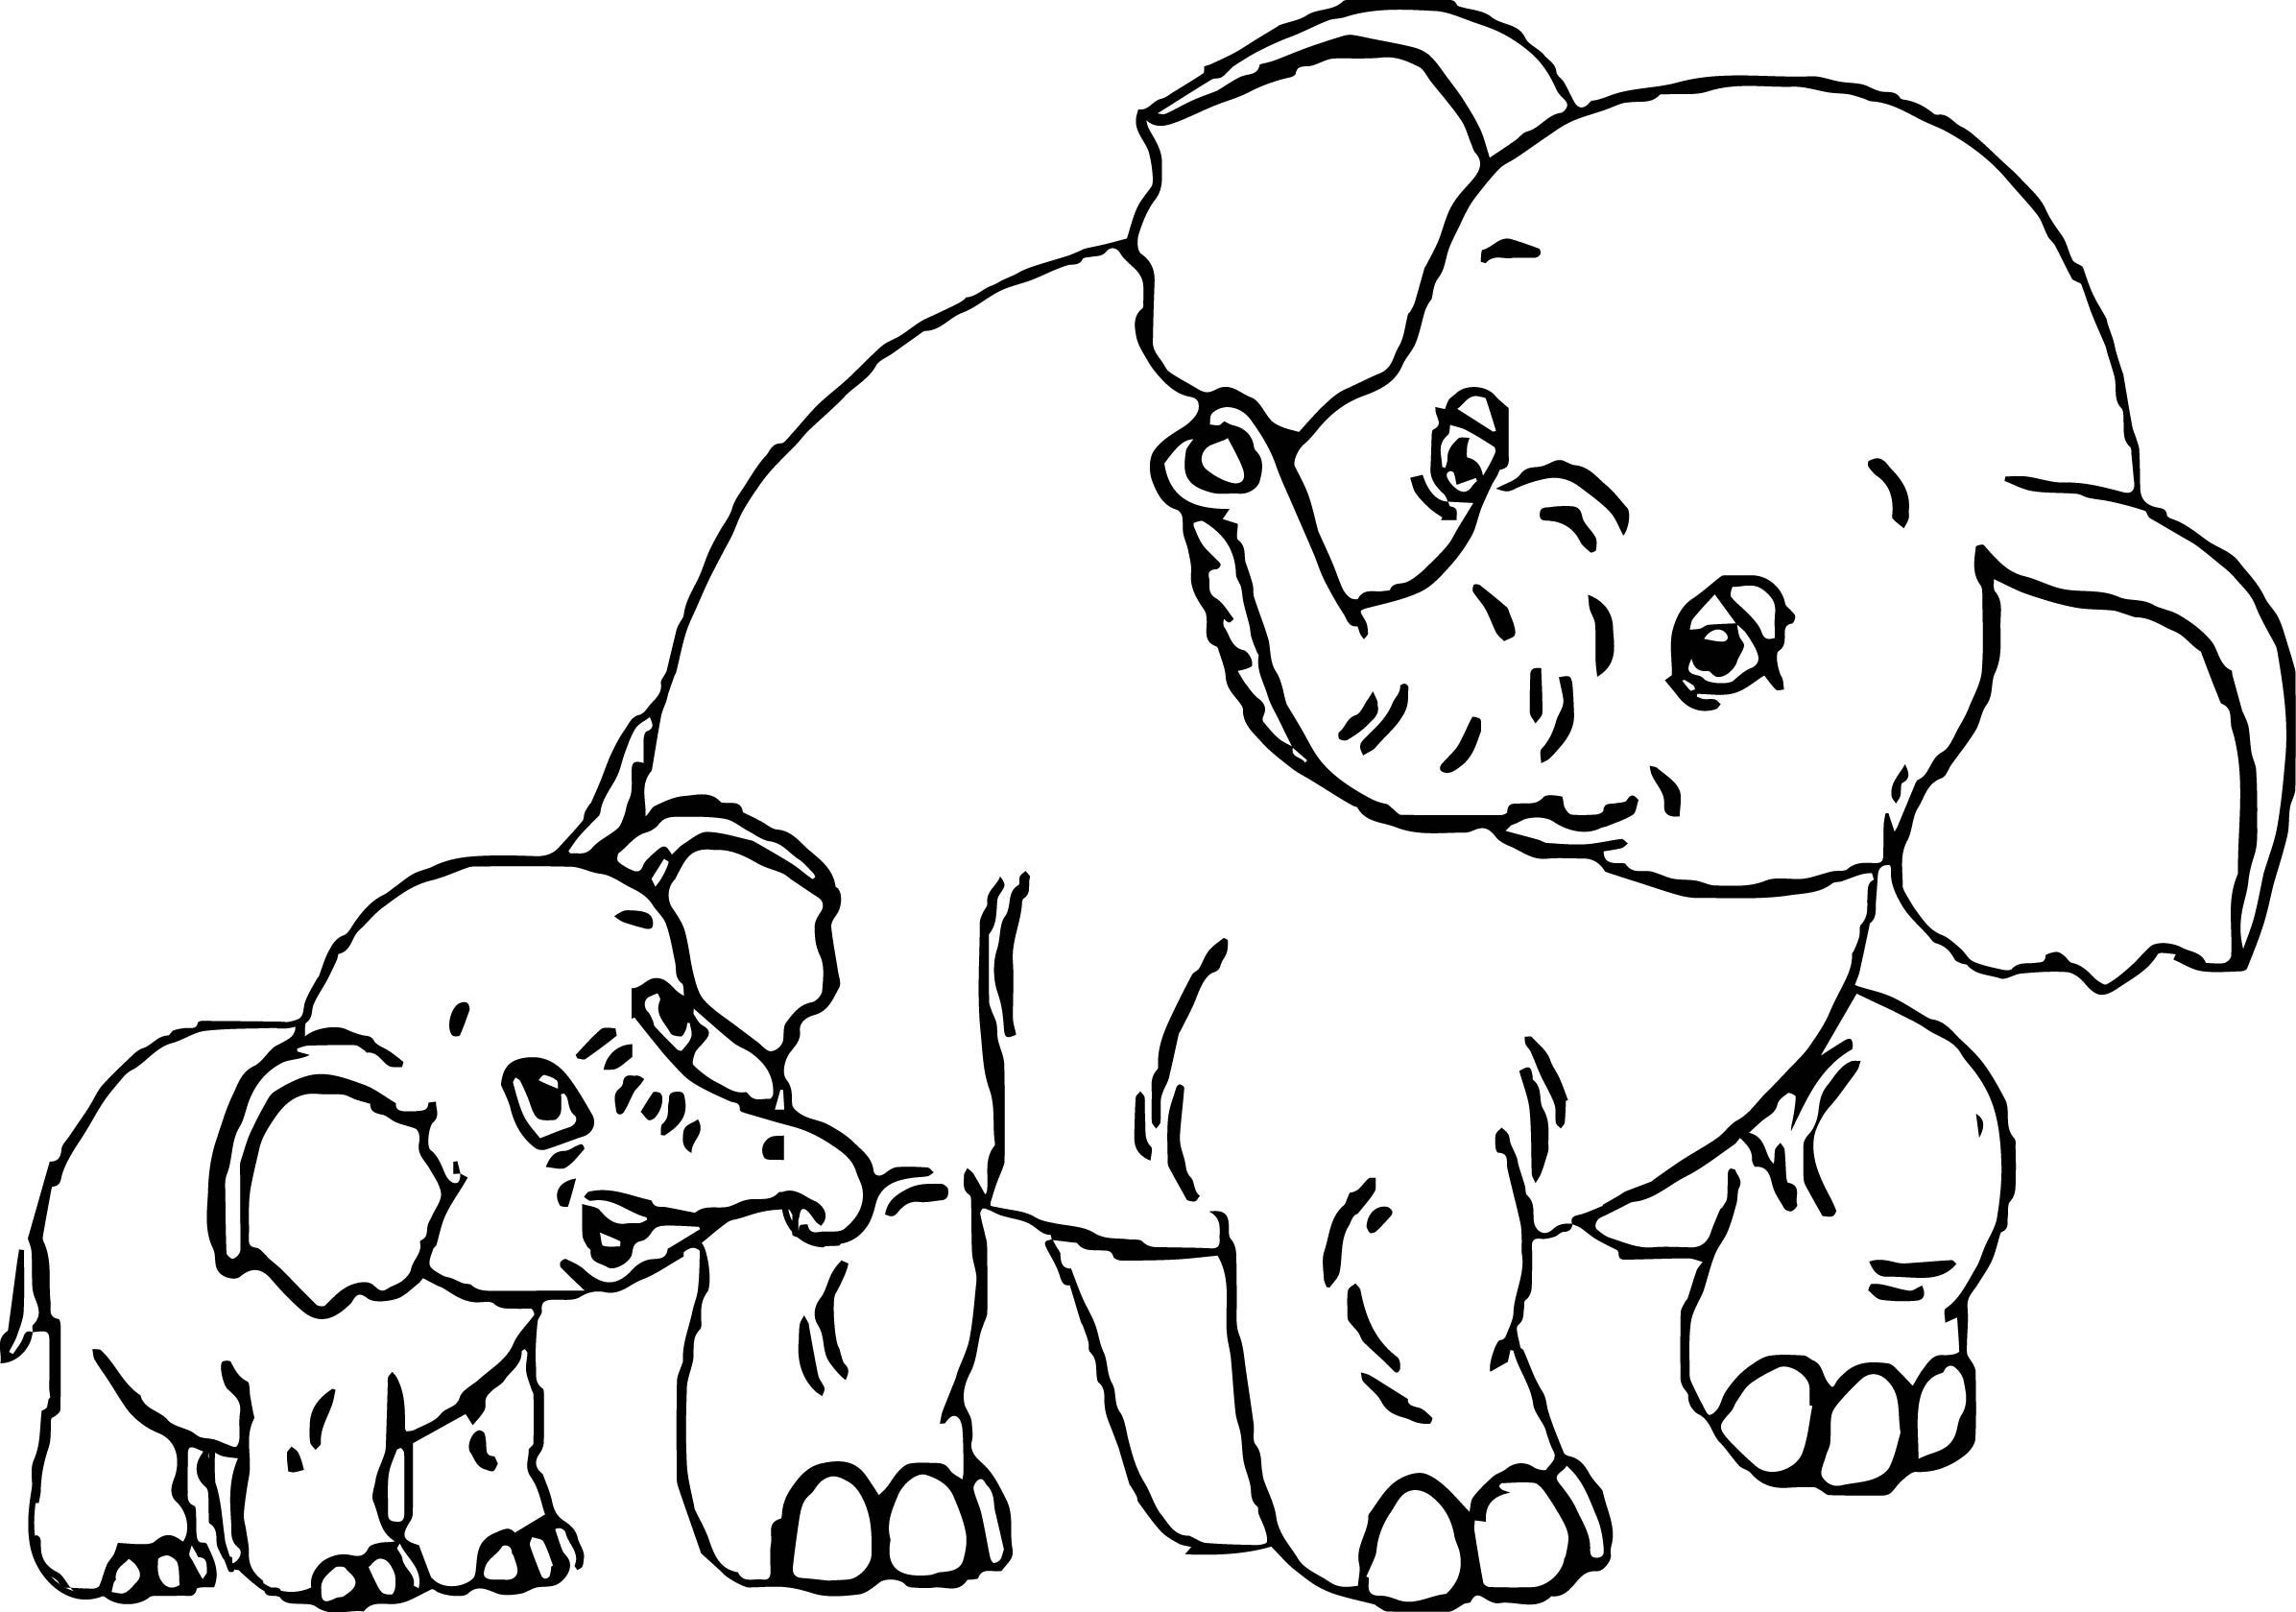 adult coloring page elephant india elephant coloring page. adult ...